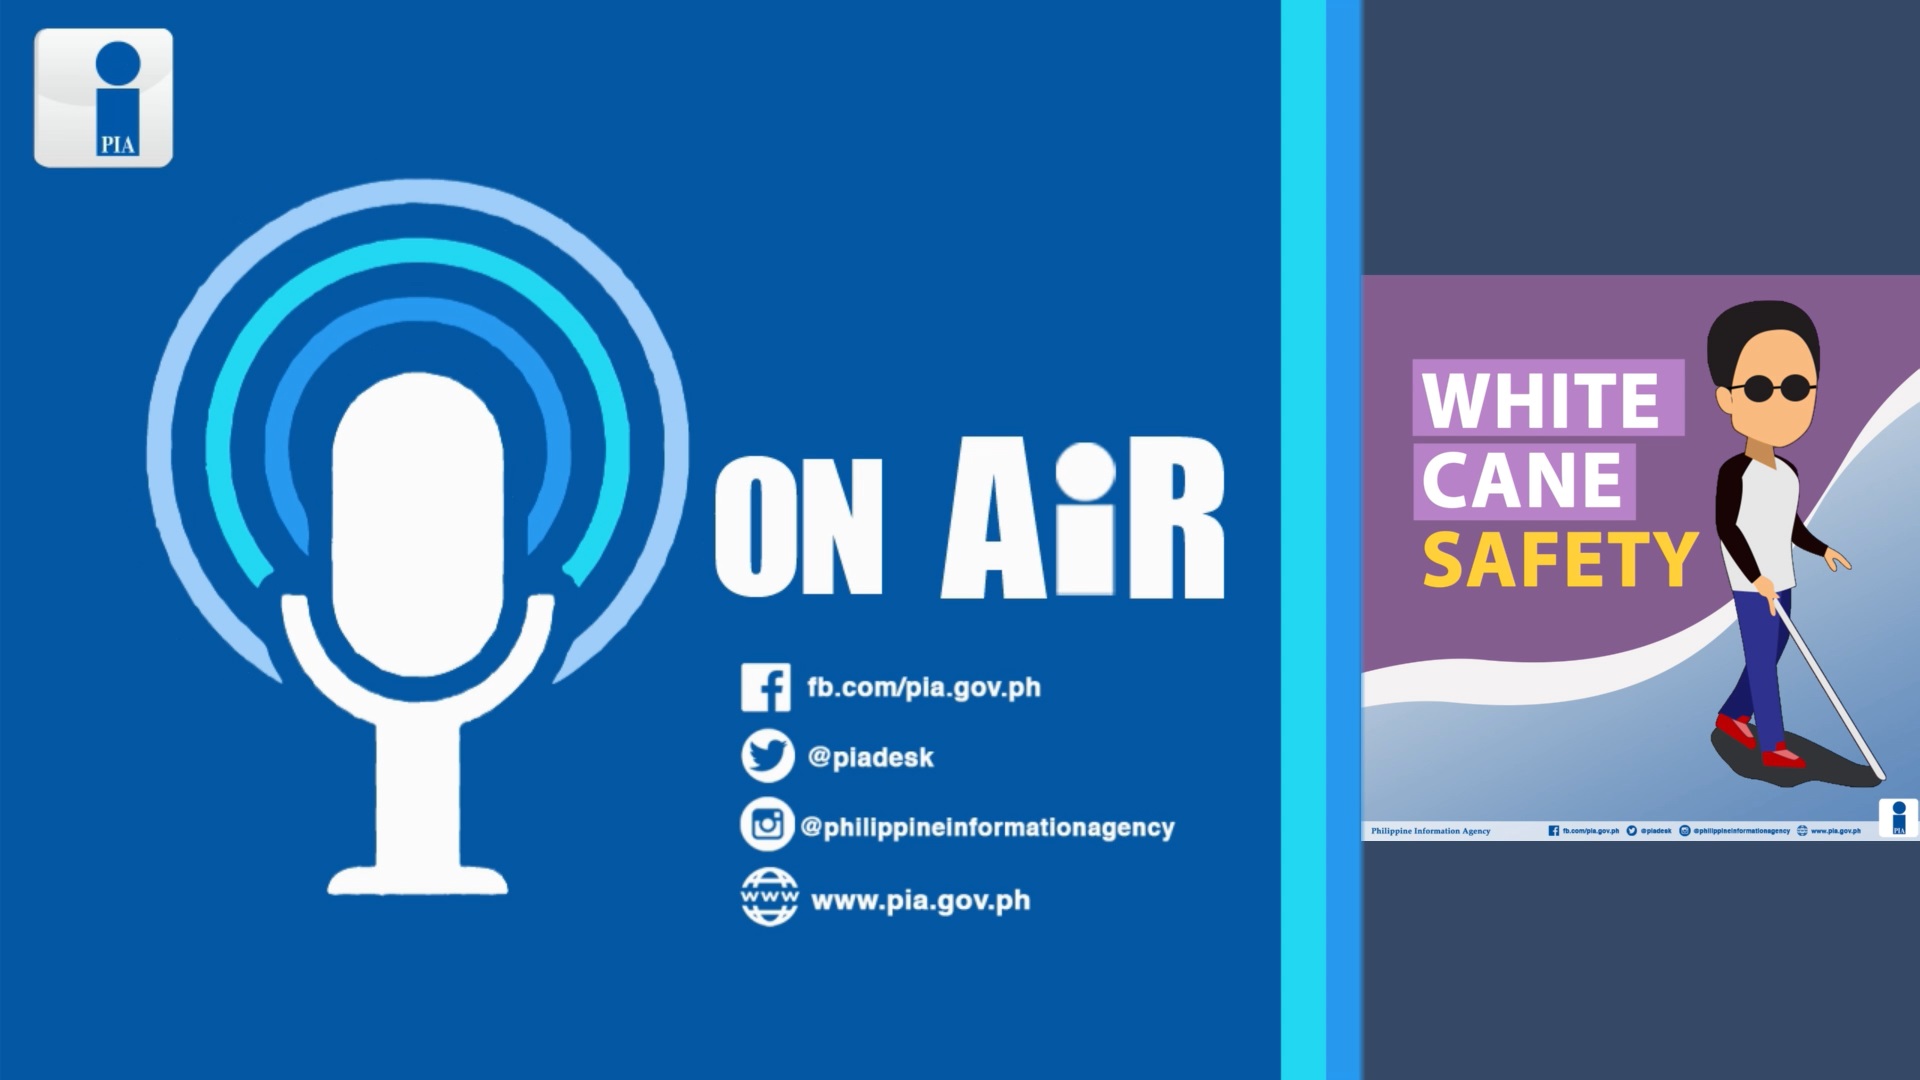 PIA ON AIR | White Cane Safety Day